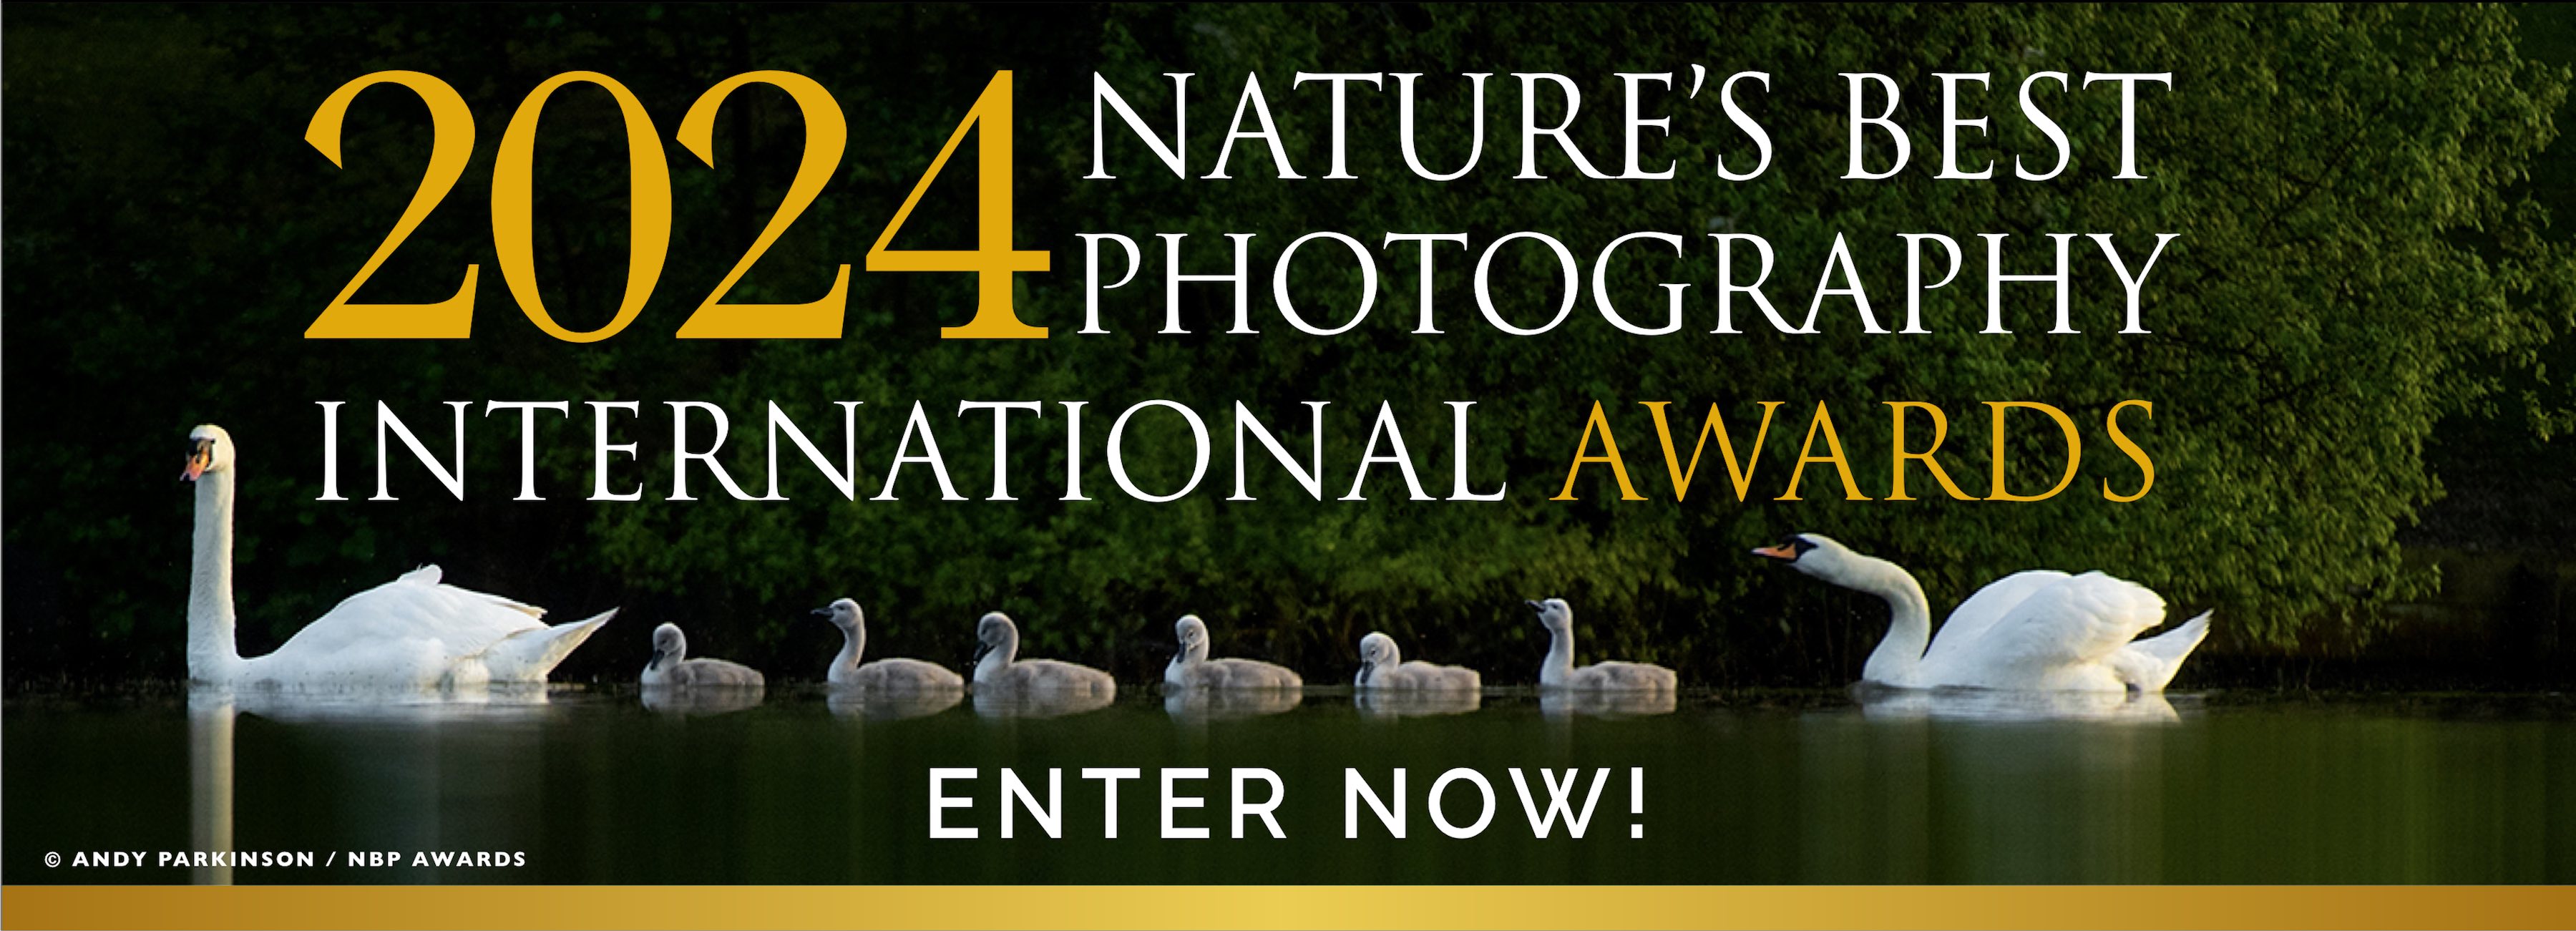 Nature's Best Photography Awards